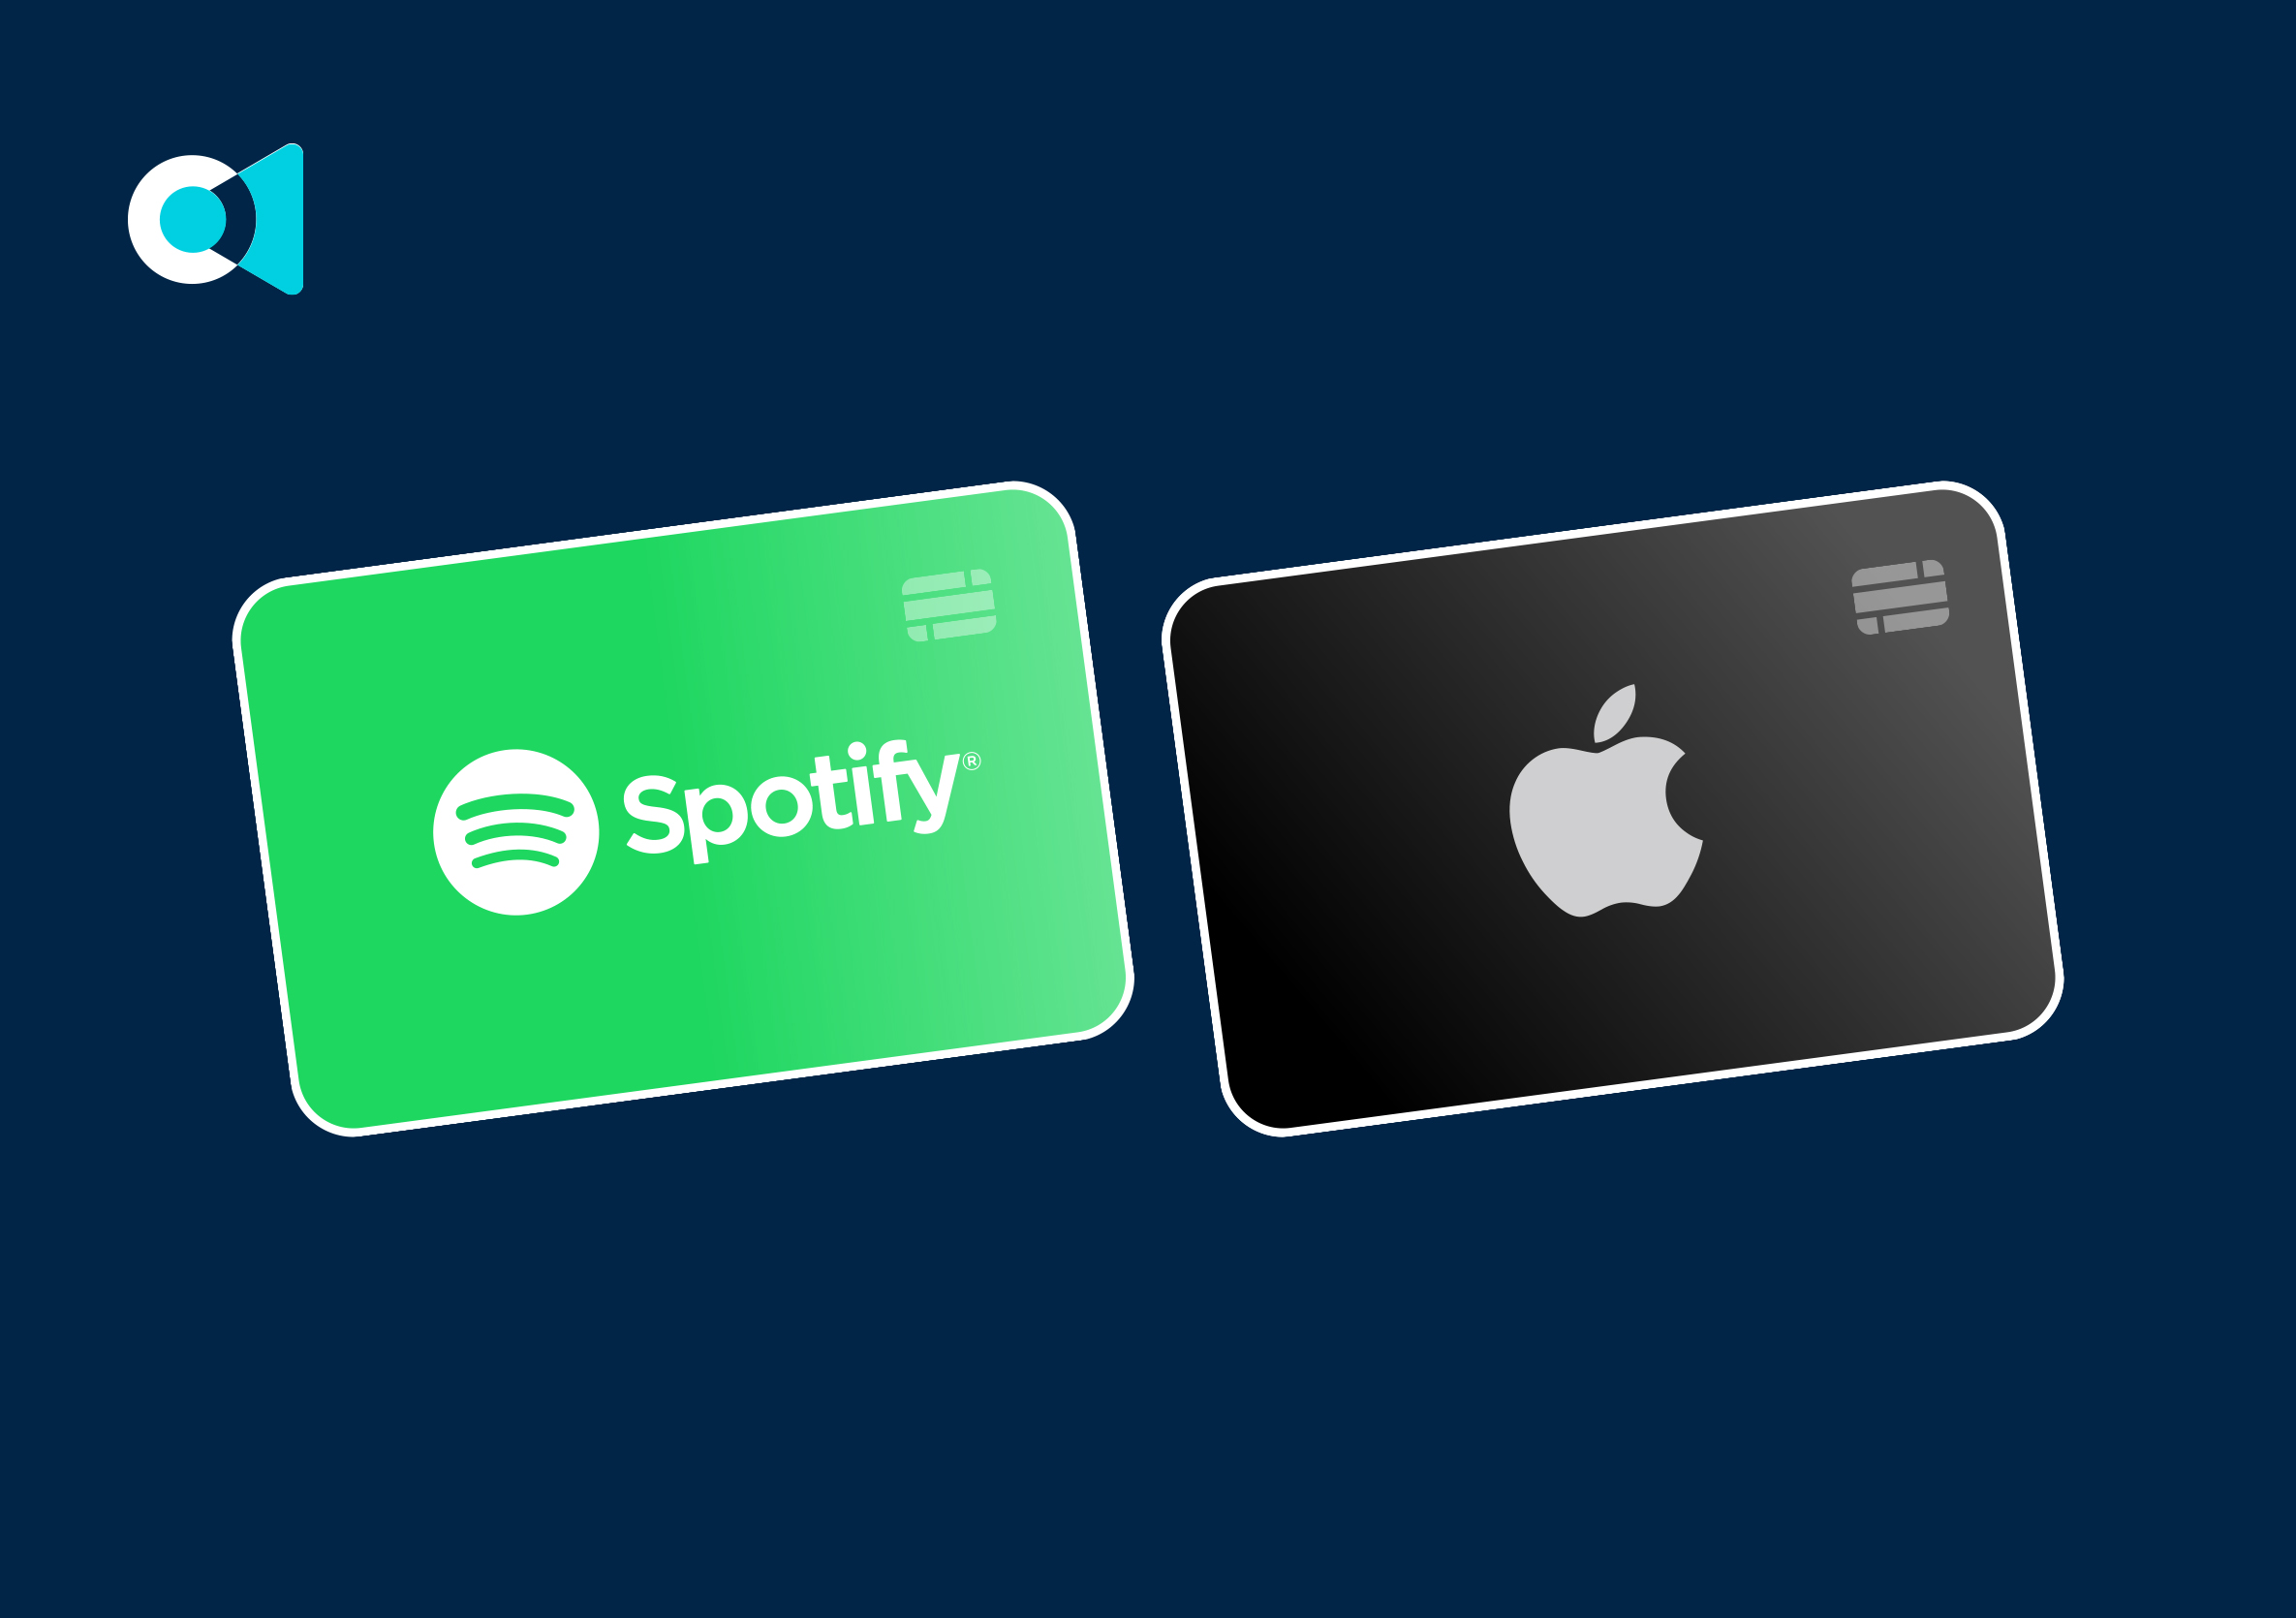 Spotify vs. Apple Music: Which is better for you